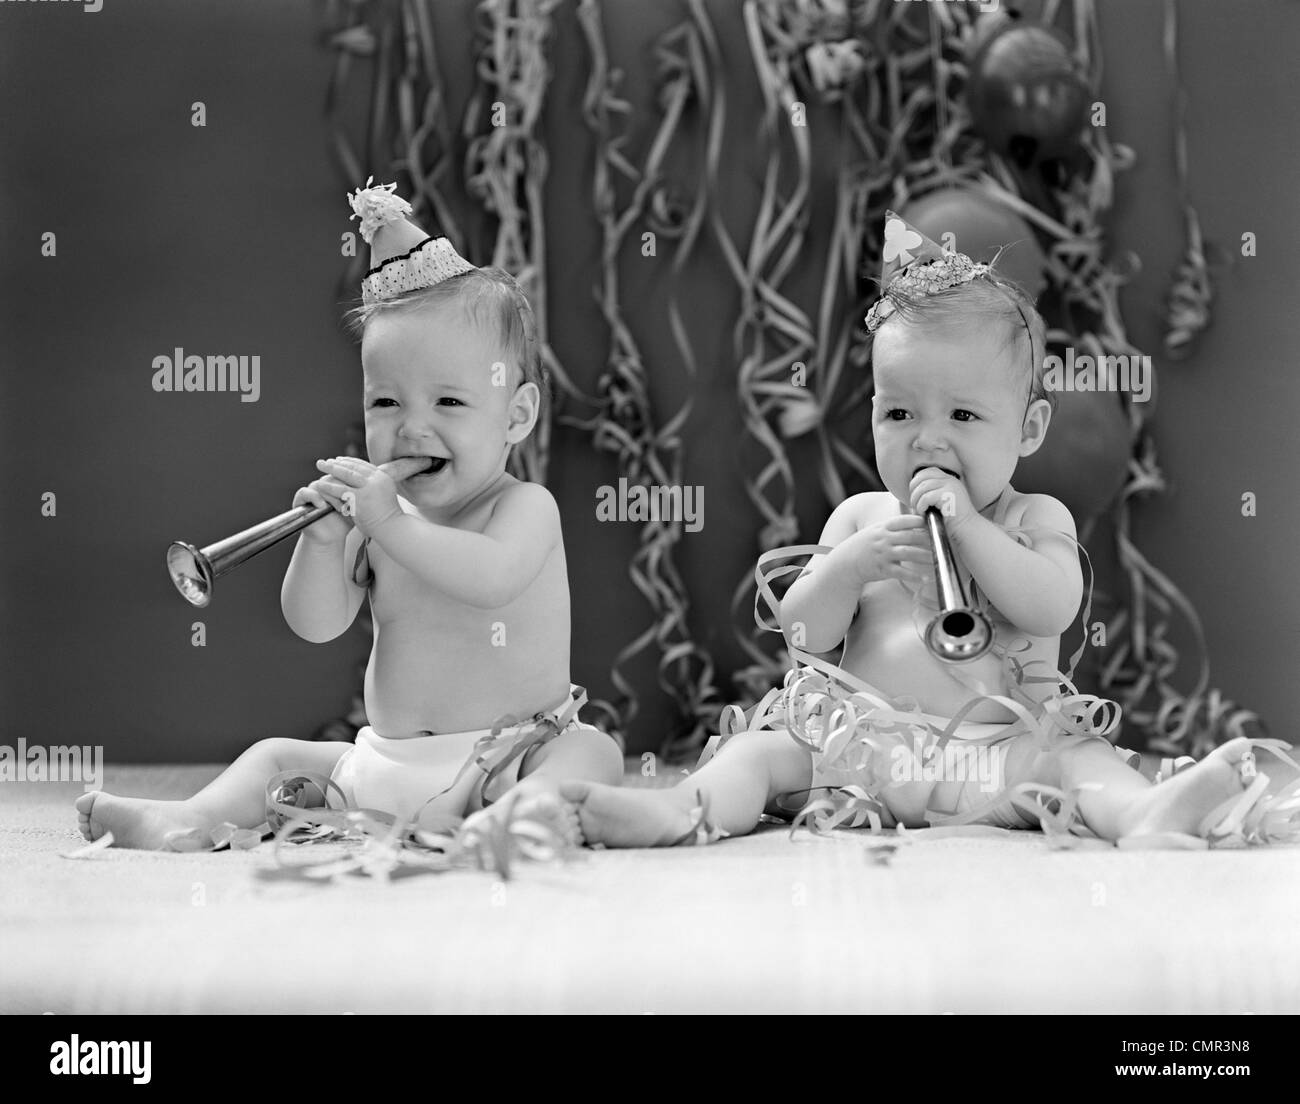 1940s TWIN BABIES WITH PARTY HATS HORNS AND PAPER STREAMERS NEW YEAR CELEBRATION STUDIO Stock Photo